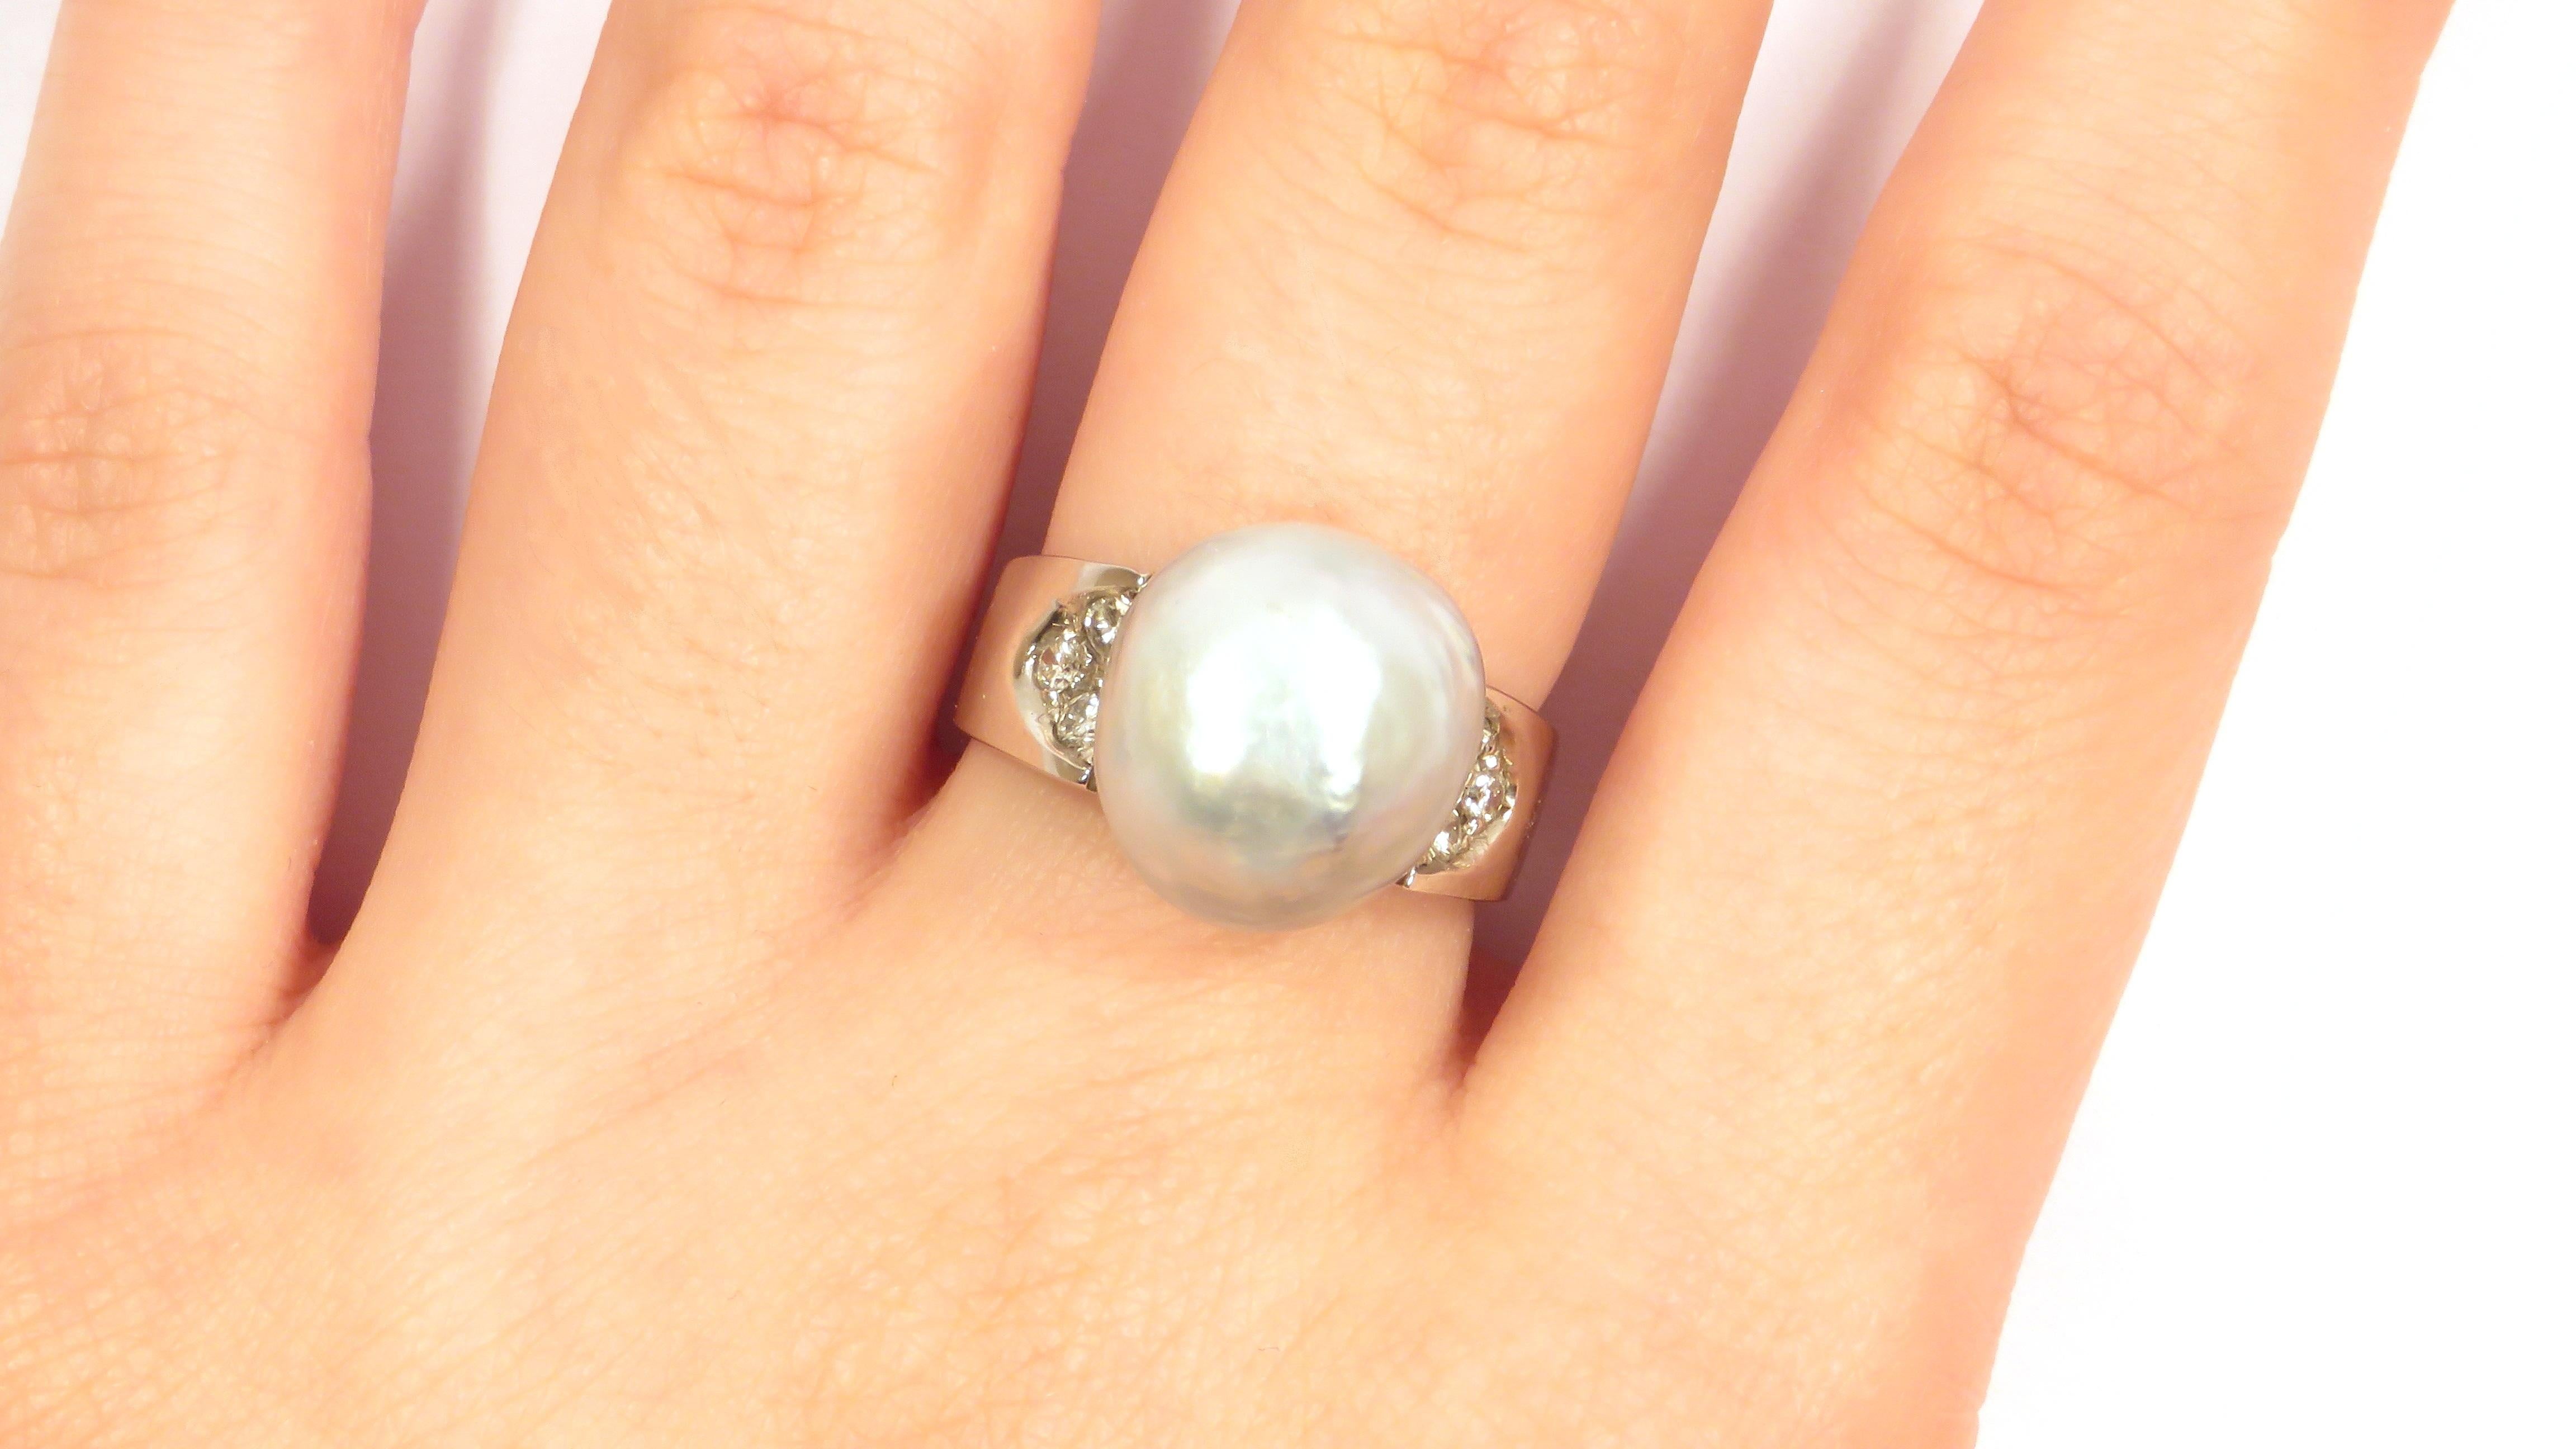 Contemporary ring in 18k white gold with white natural Australian pearl 14 x 11 mm / 0.551 x 0.433 inches and six white diamonds 0.20 ctw.
Us finger size 6, Italian size 12, French size 52, it can be resized.
It  is stamped with the Italian Gold